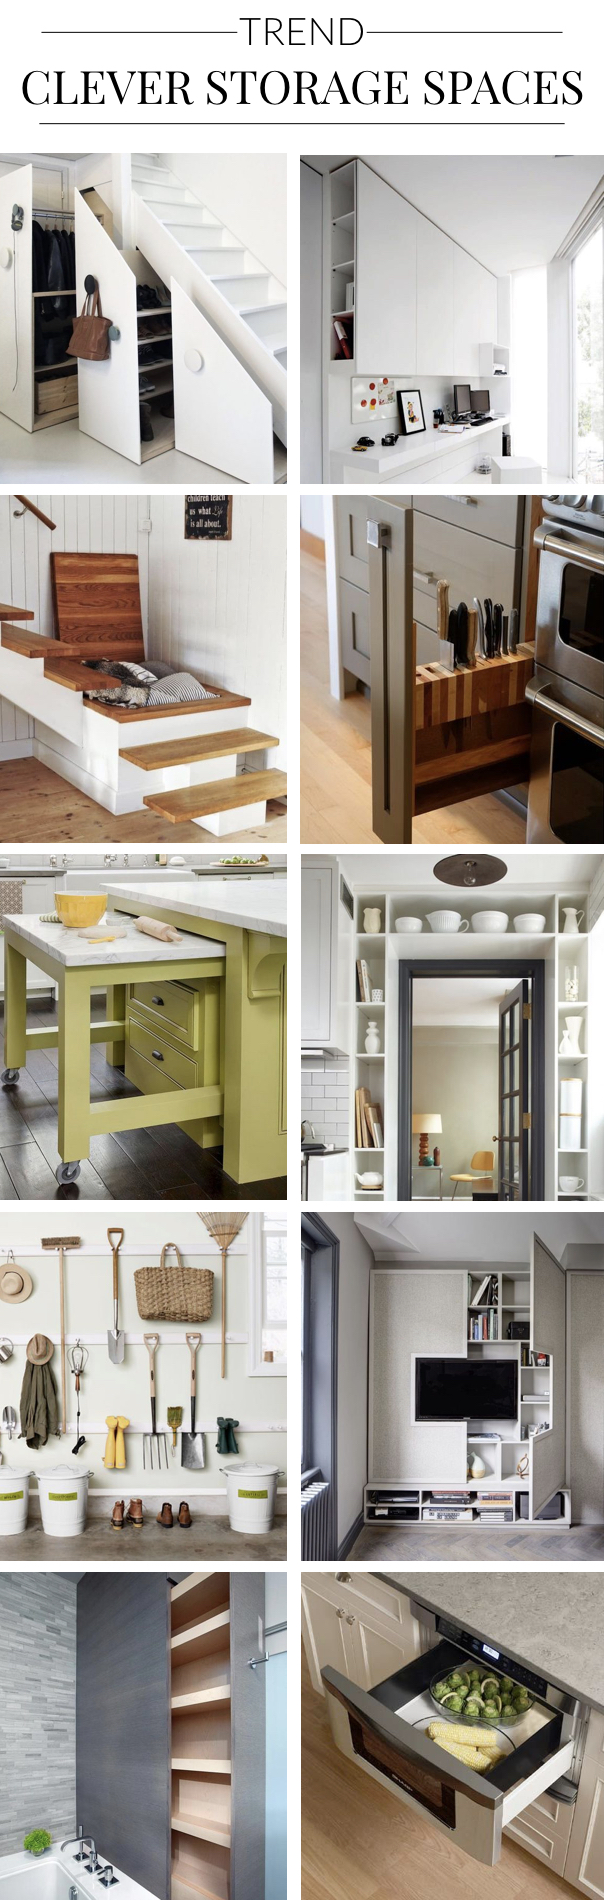 Pulp-Home-Clever-Storage